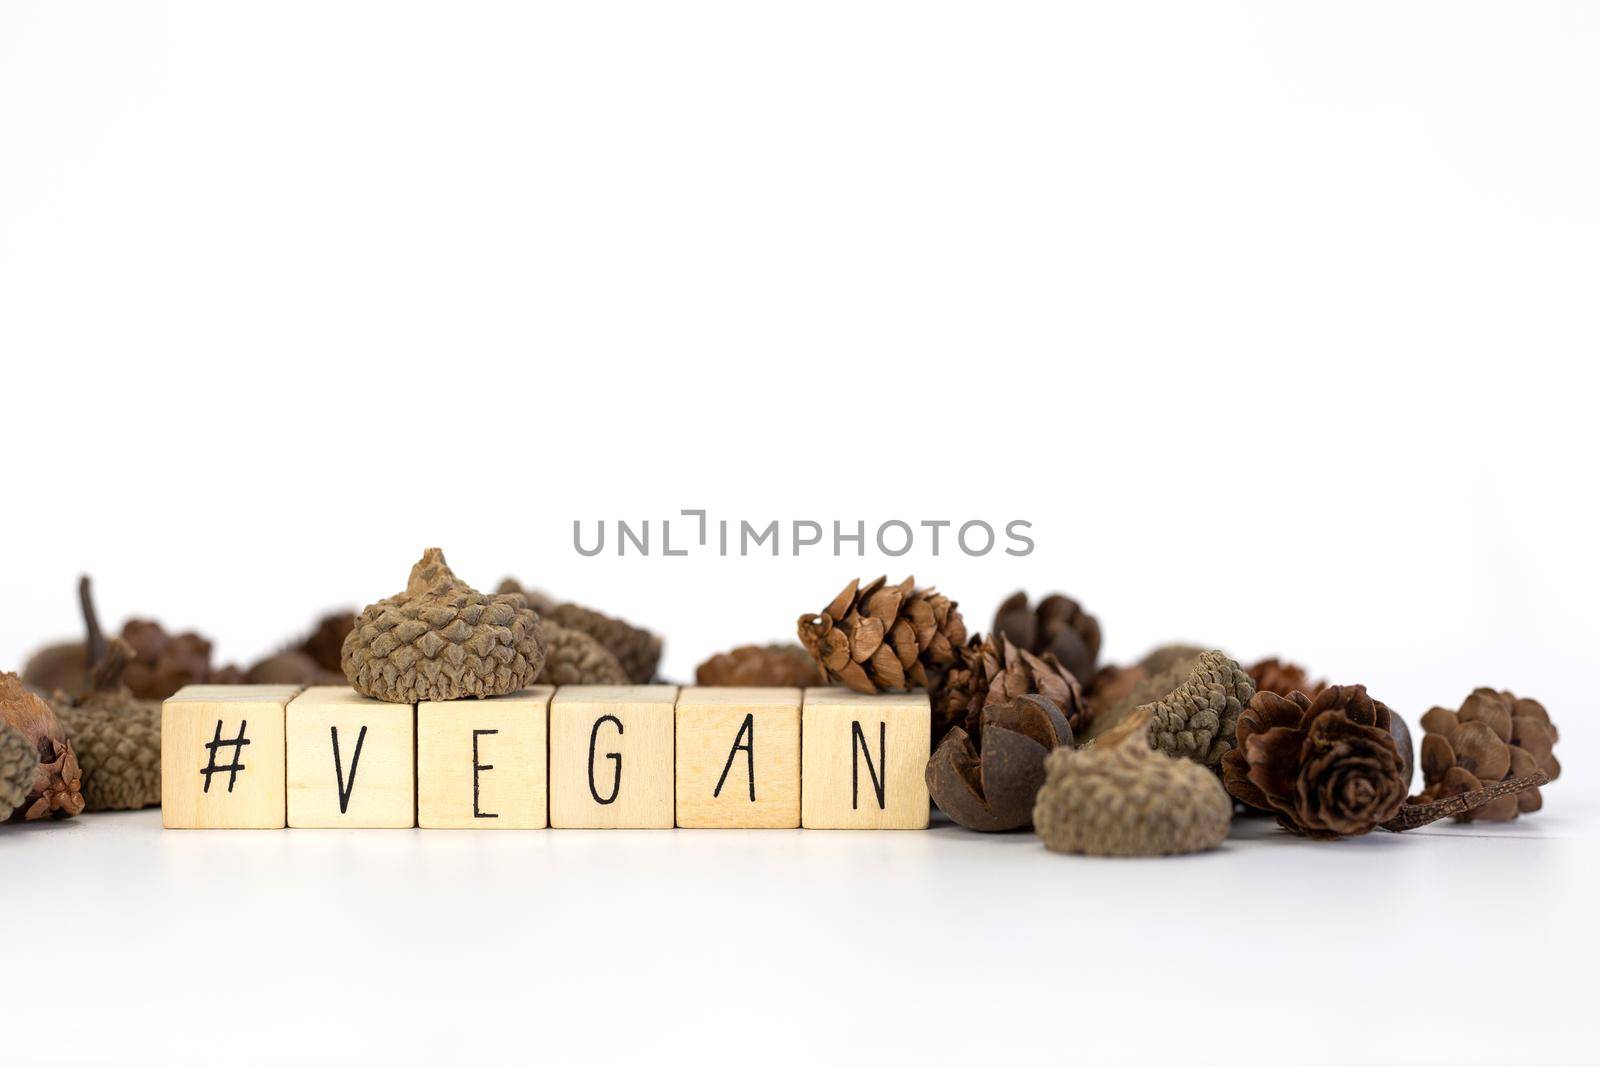 Vegan and hashtag written with wooden cubes and nature decoration isolated on white background with copy space, vegan,vegetarian,health concept background modern design natural style by Annebel146